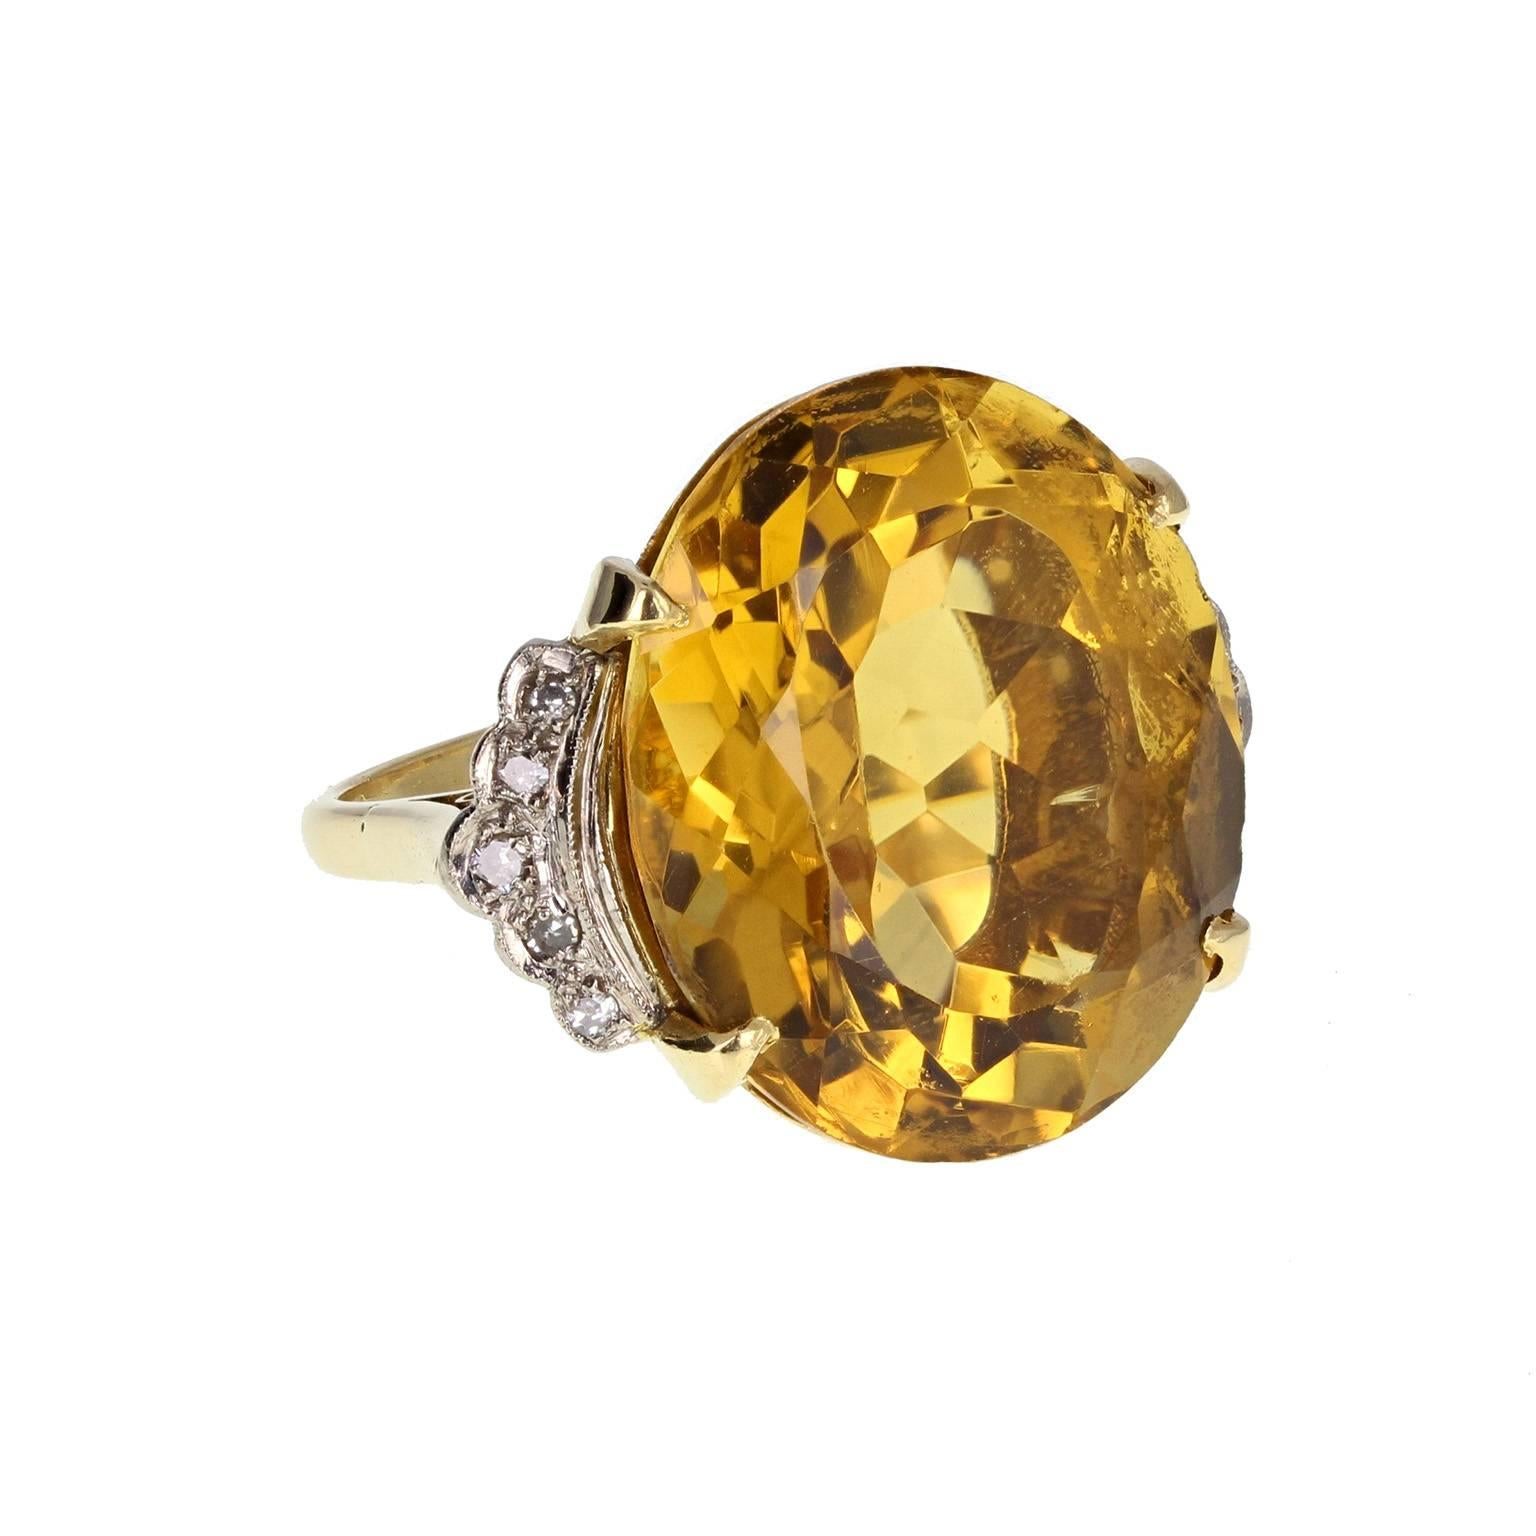 A fine and impressive cocktail ring, circa 1930s. The central oval-cut citrine of deep yellowish-orange mounted in four claws and flanked on each side by five round-cut diamonds in a millgrain detailed accent. A bold and stylish ring. 
Shank and